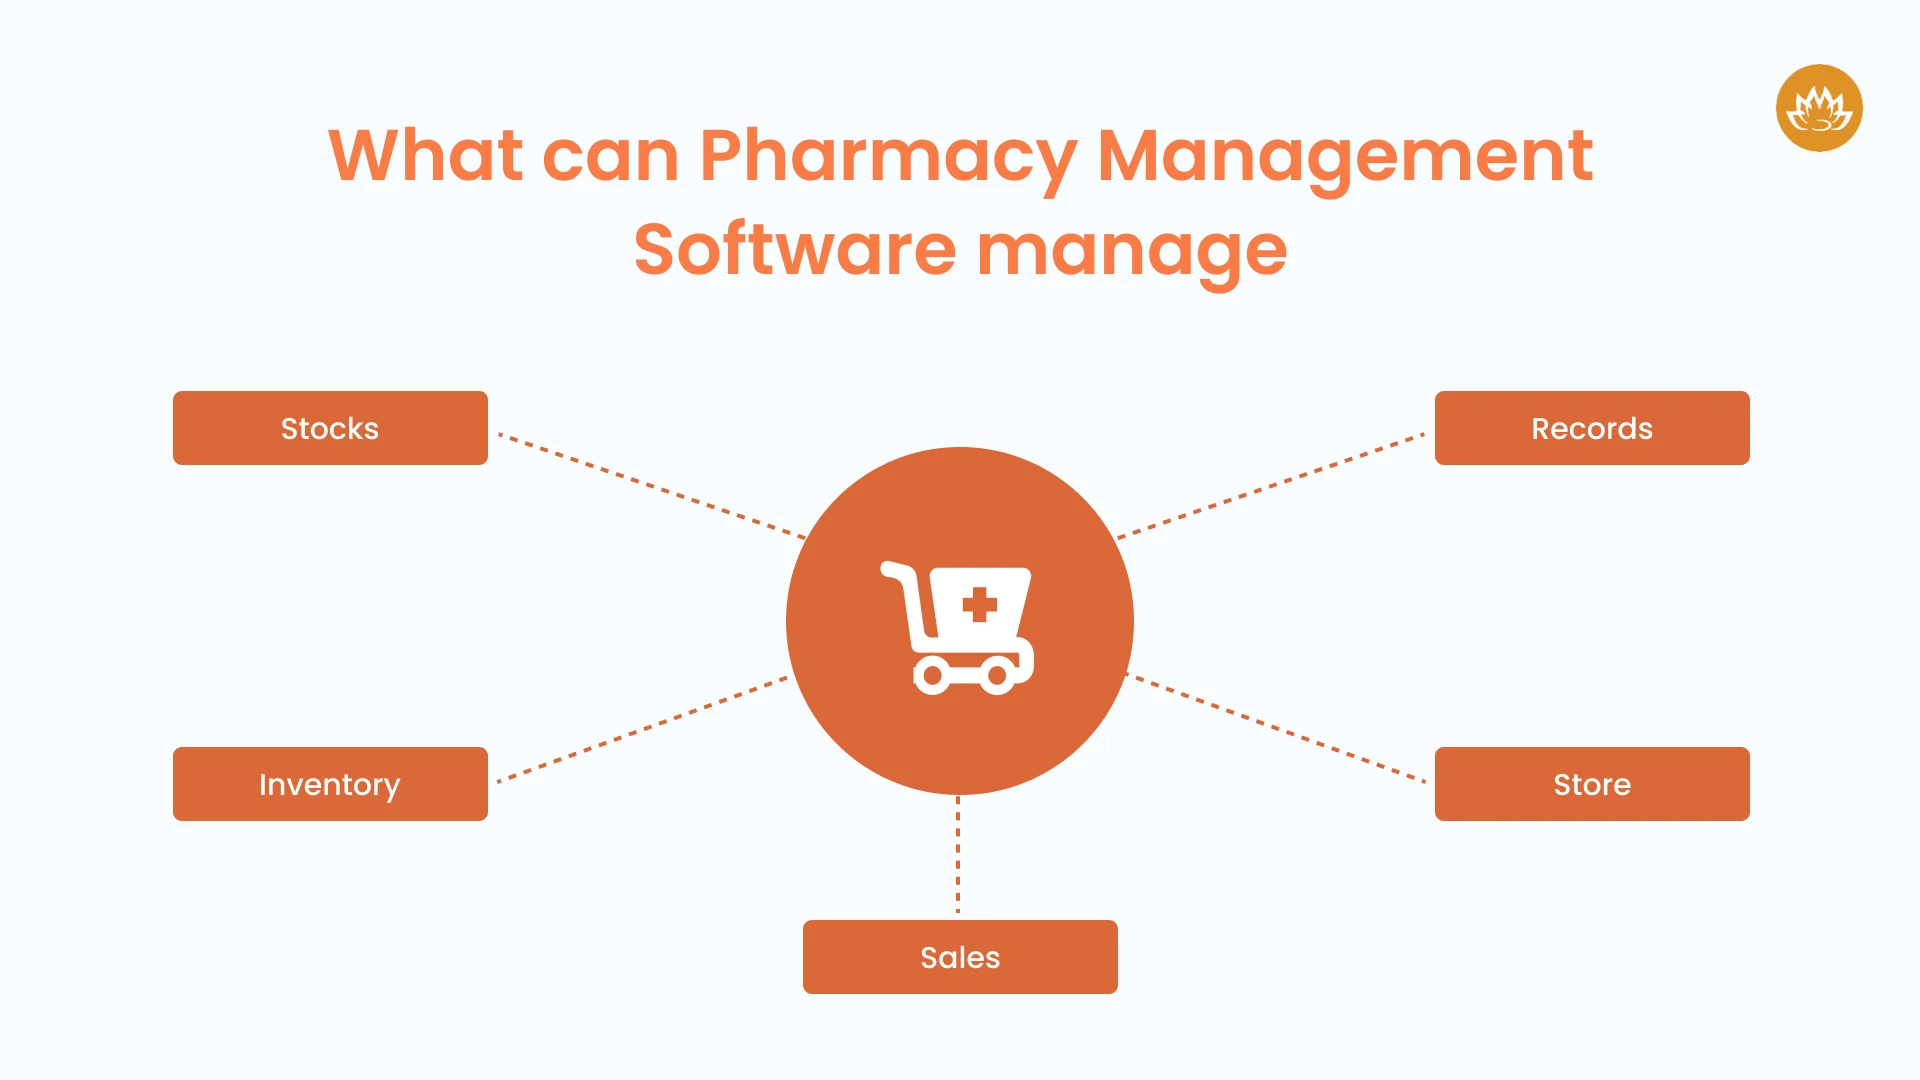 What can Pharmacy Management Software manage